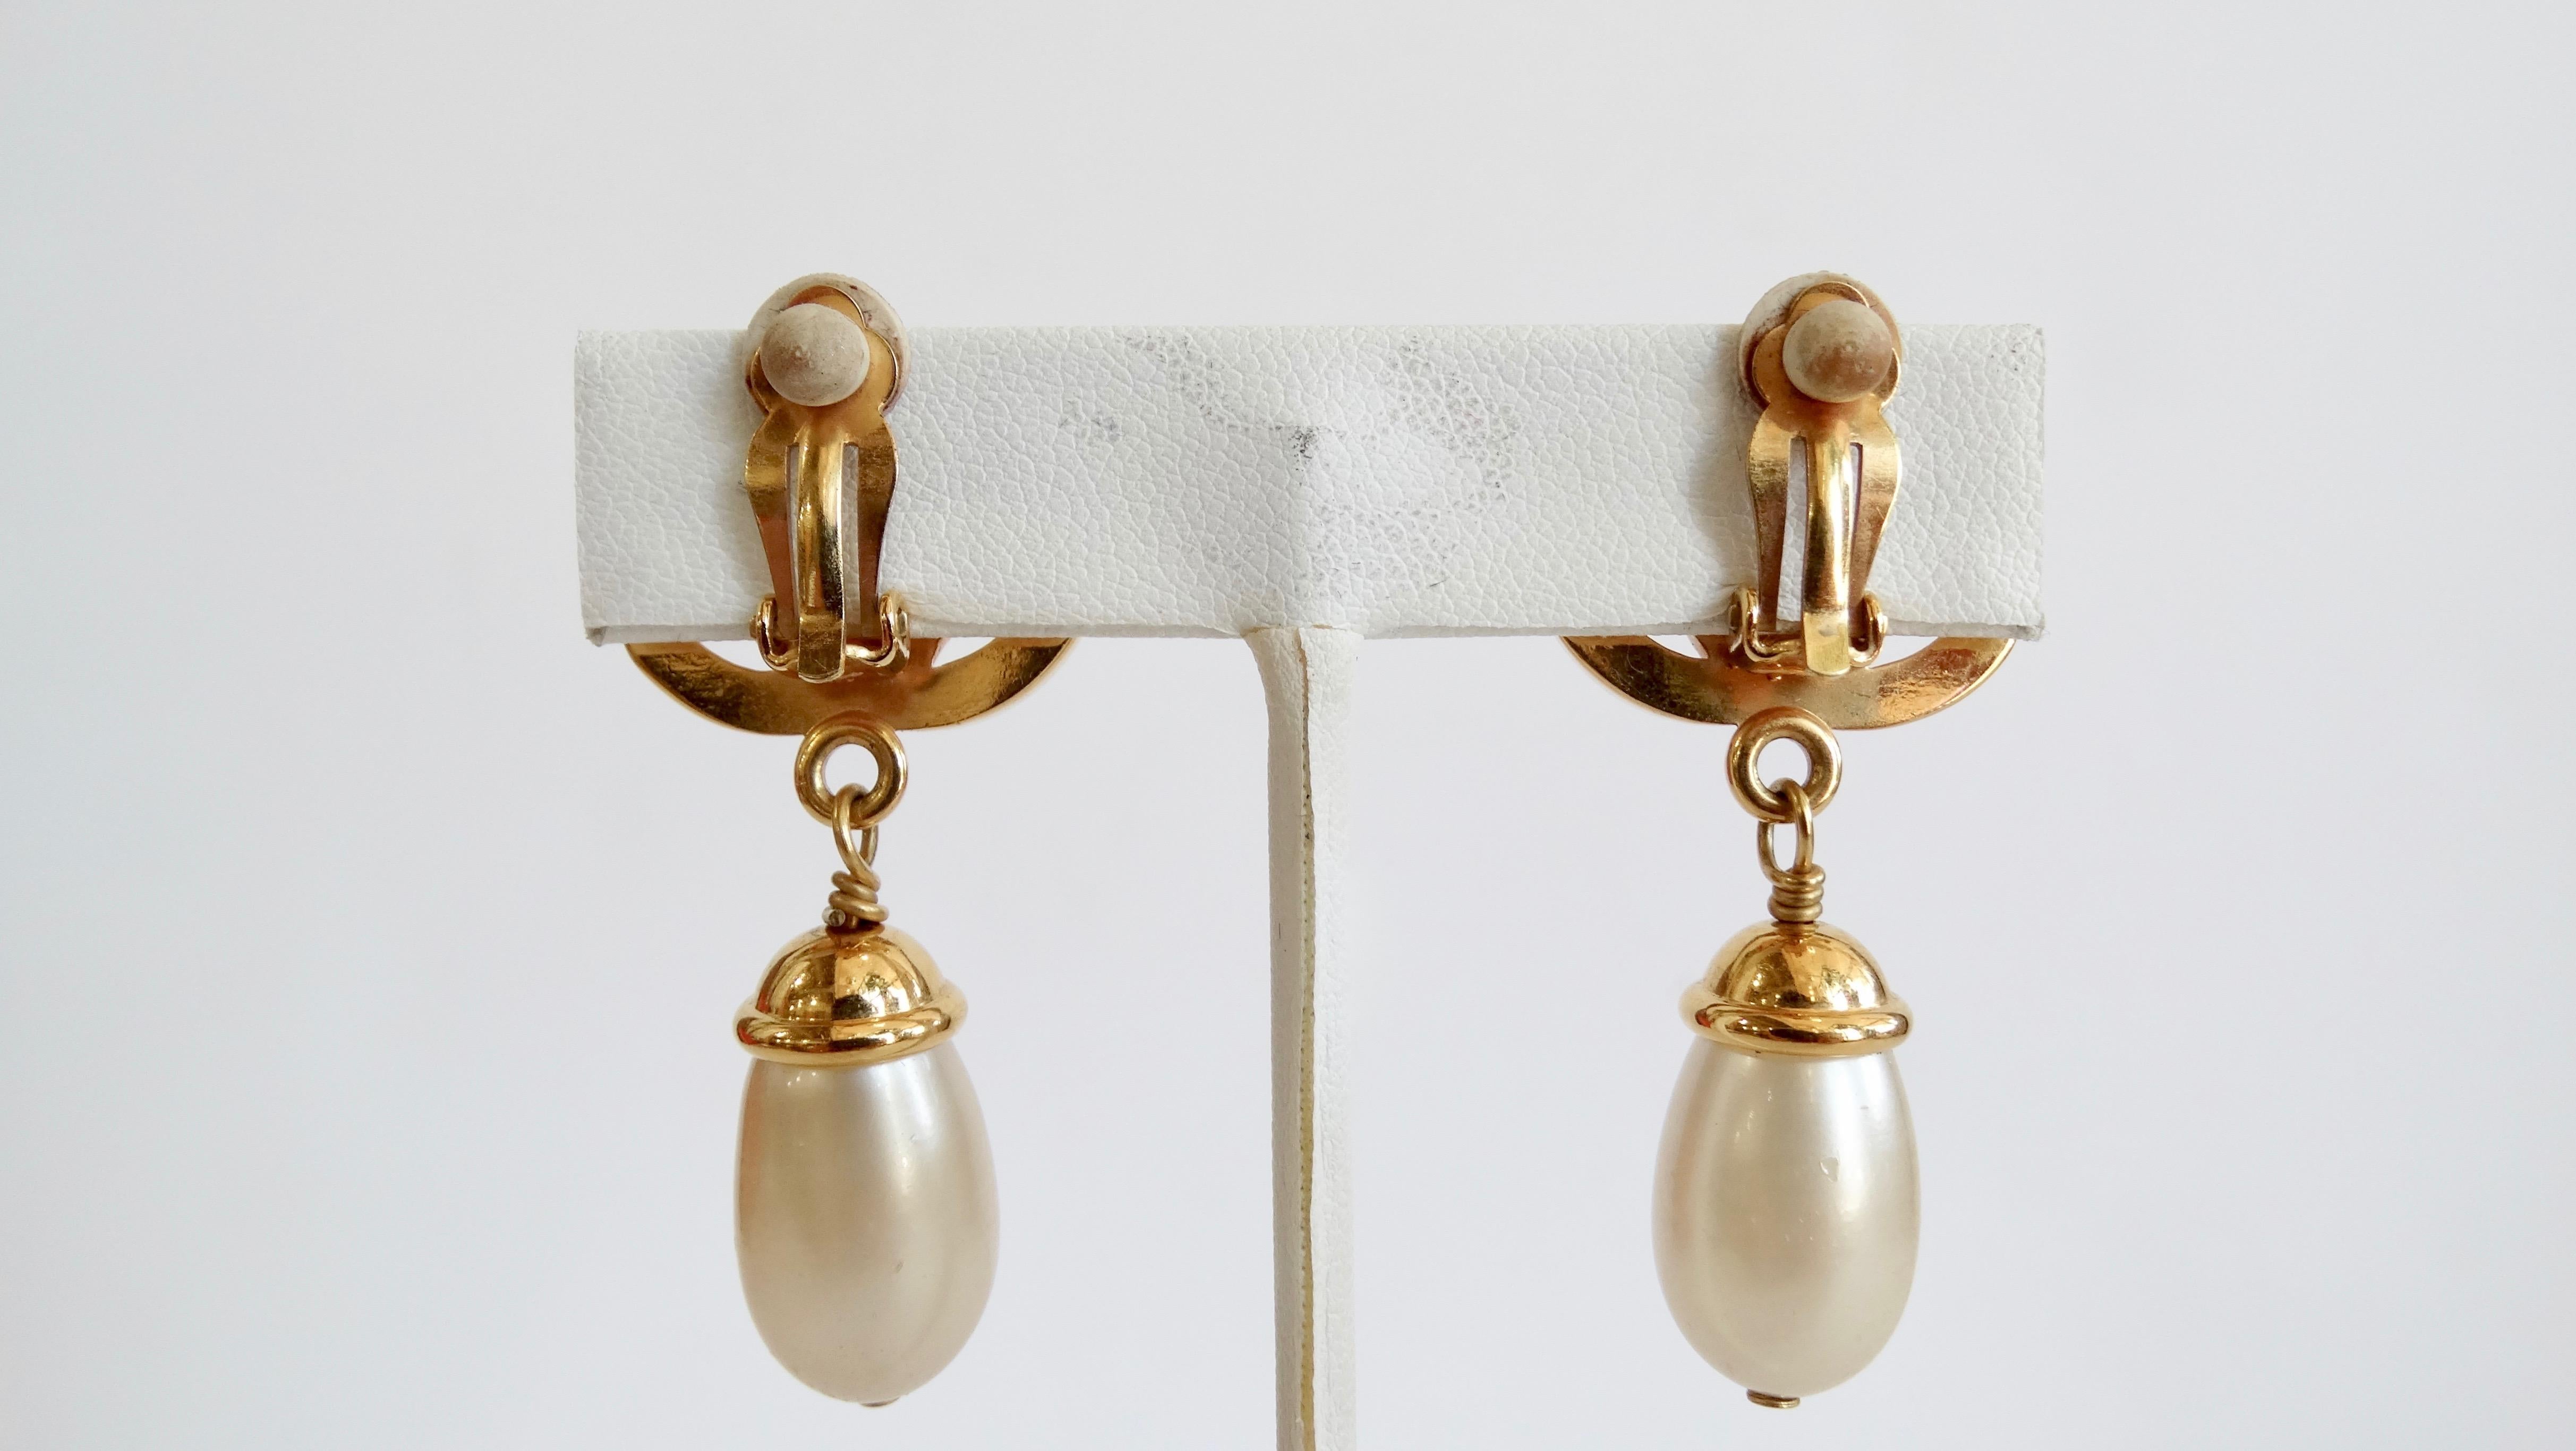 Everyone needs a great piece of vintage Chanel jewelry in their collection! Circa 1996 from their Fall/Winter collection, these gilded metal Chanel drop earrings feature the iconic CC mademoiselle turn-lock encrusted with Swarovski crystals and a